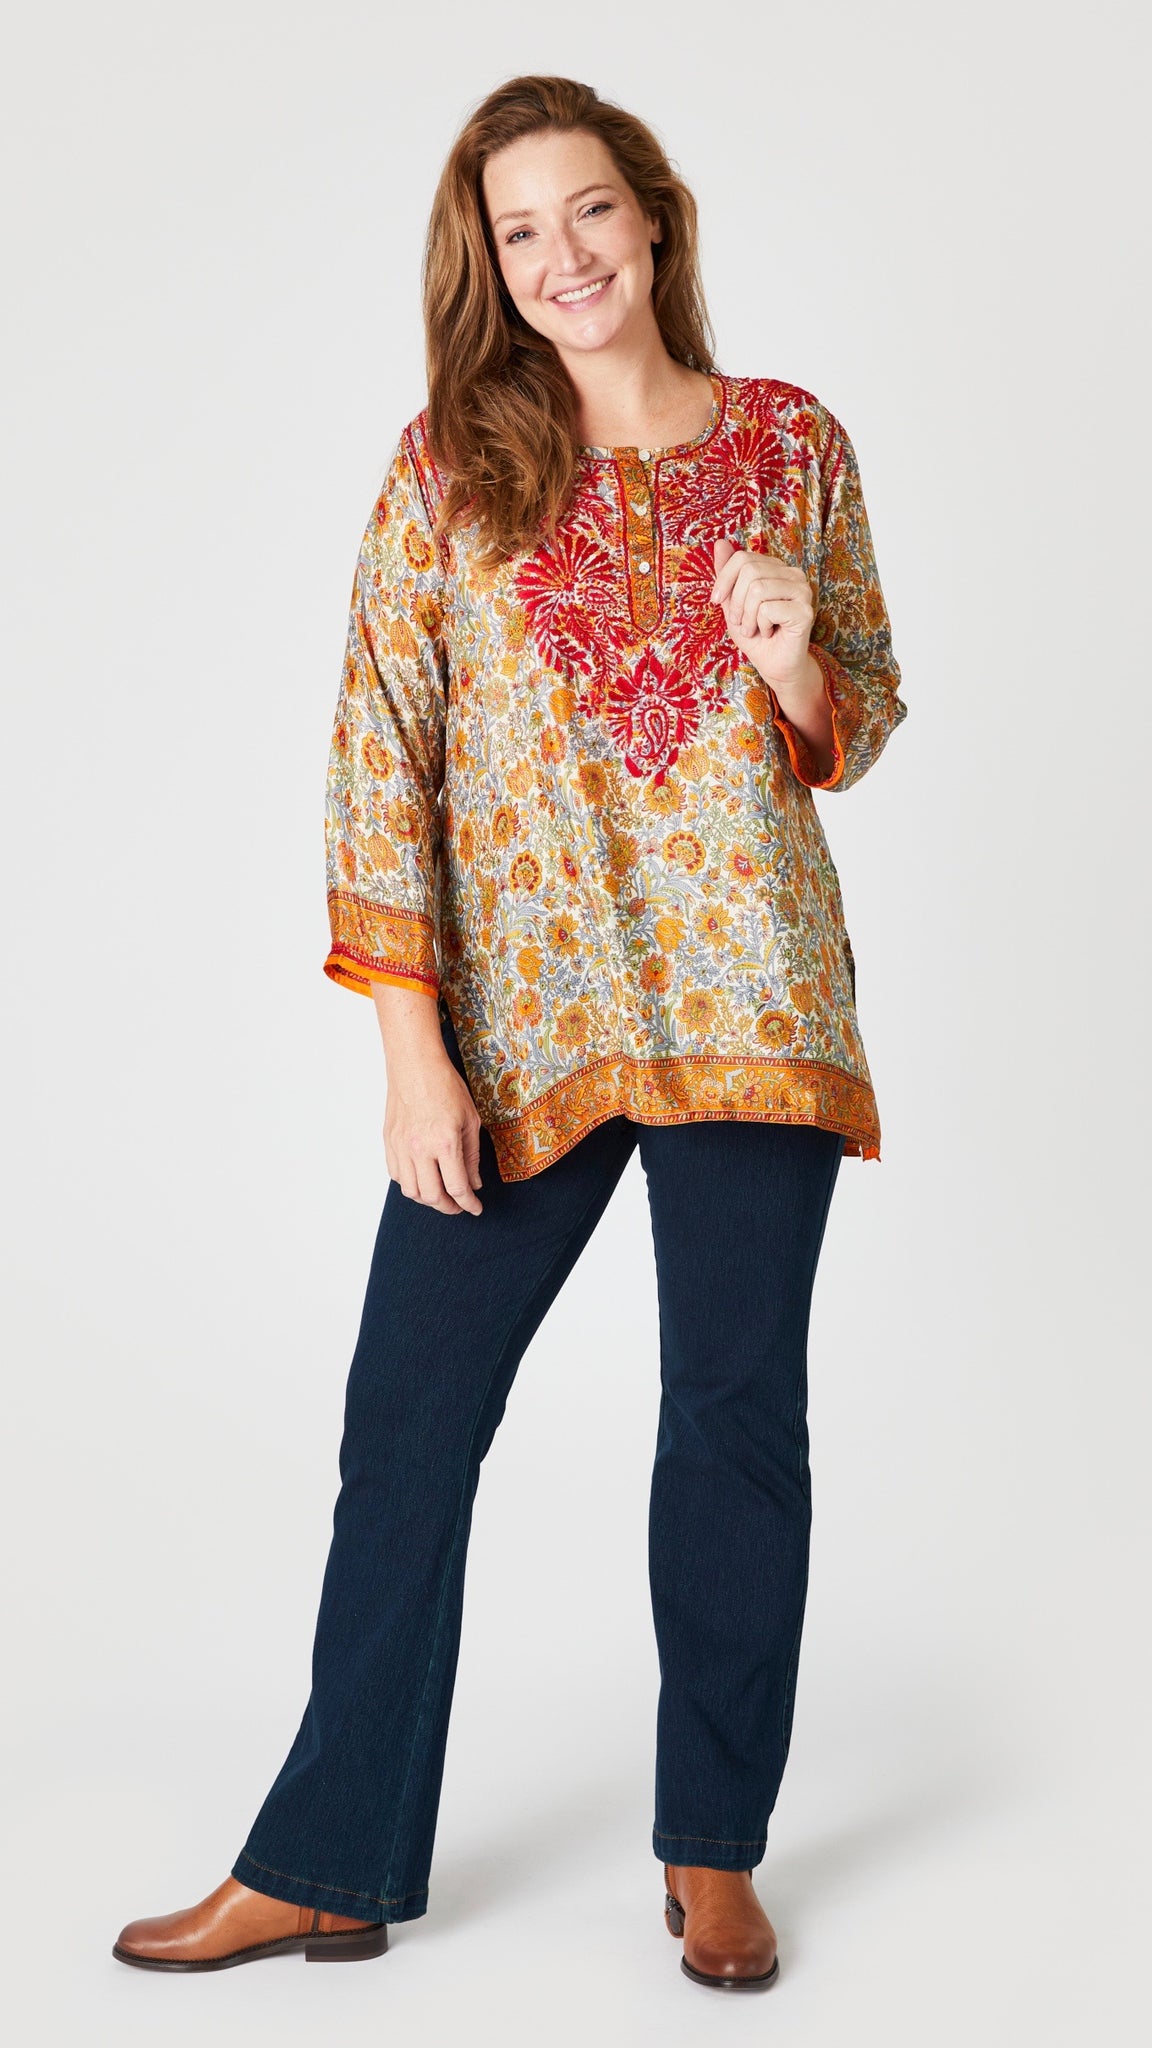 Model wearing amber and red silk embroidered tunic with 3/4 sleeves, indigo bootcut jeans, and tan leather boots.